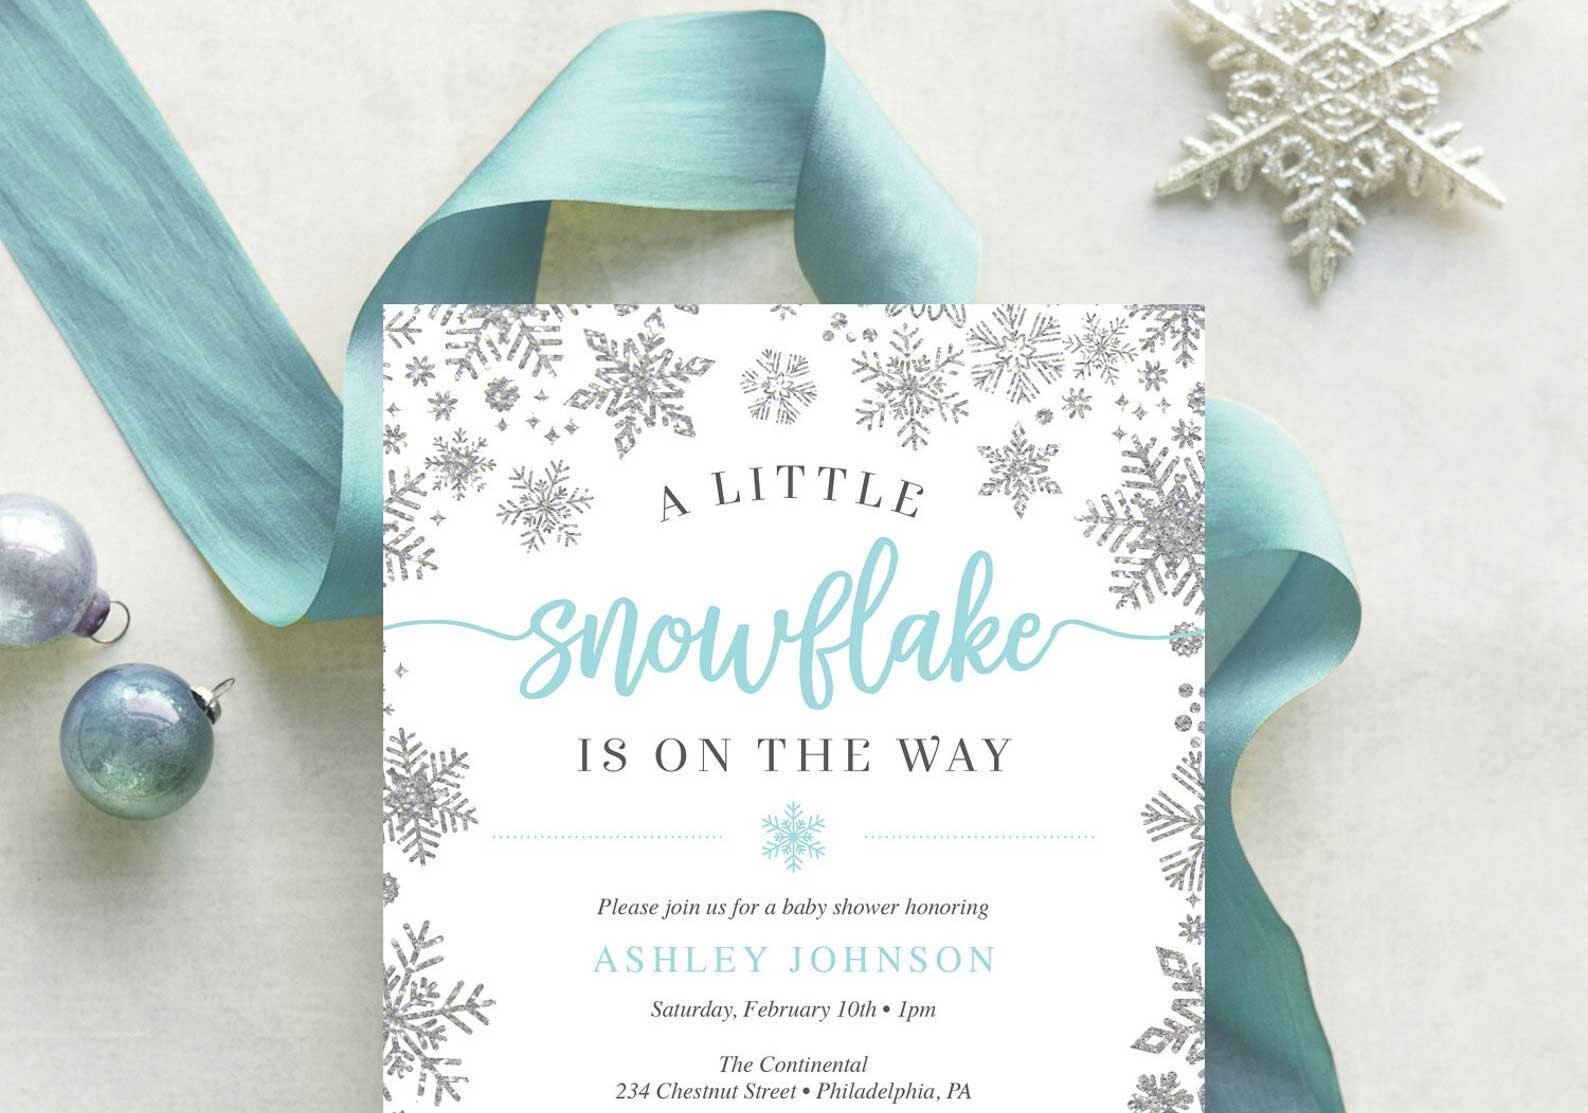 Winter Snowflake Baby Shower Invitations for your Winter Baby Shower?